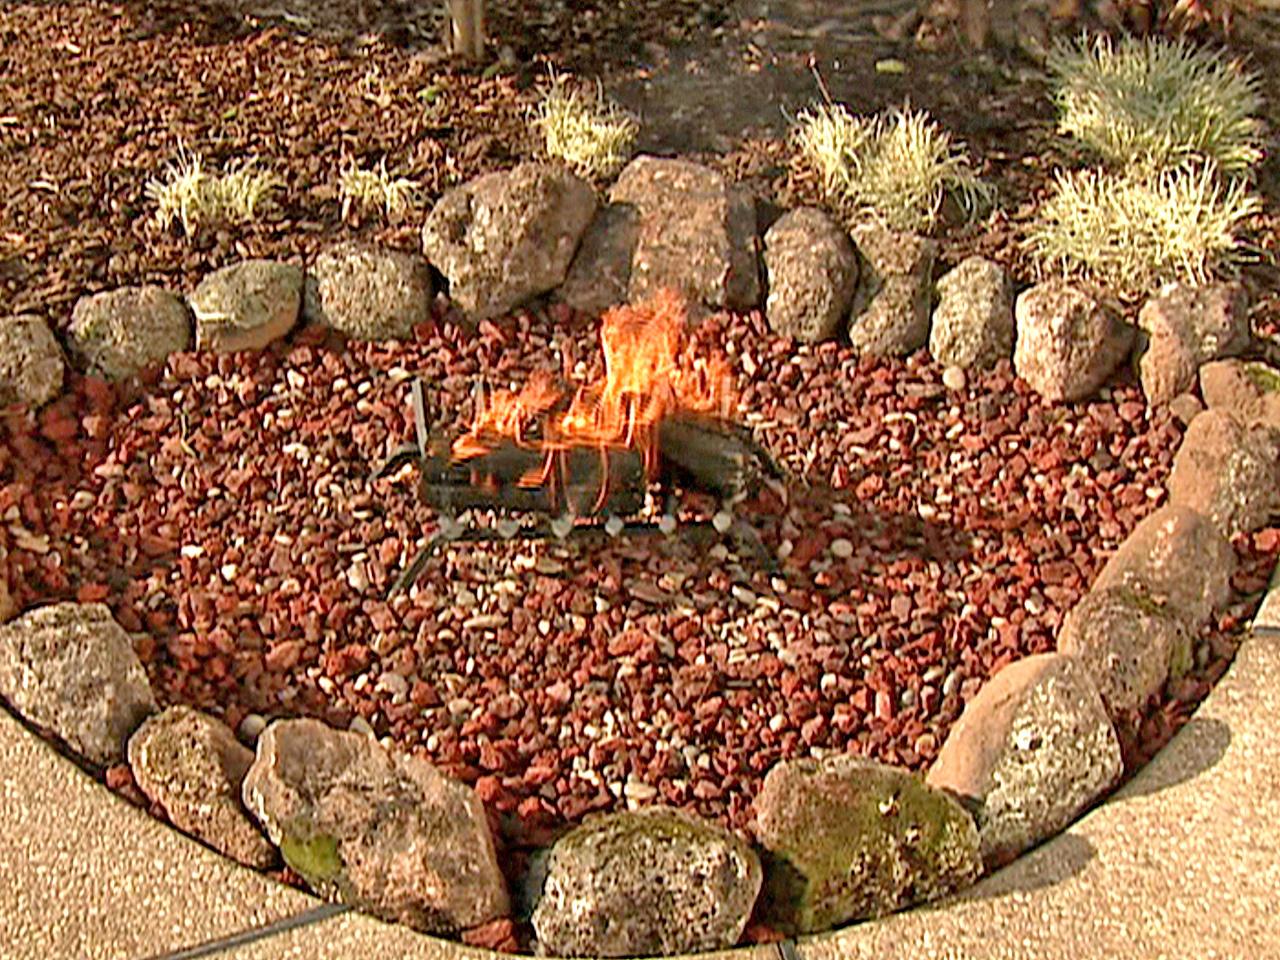 Outdoor Fire Pits And Pit Safety, Starting A Fire In A Fire Pit